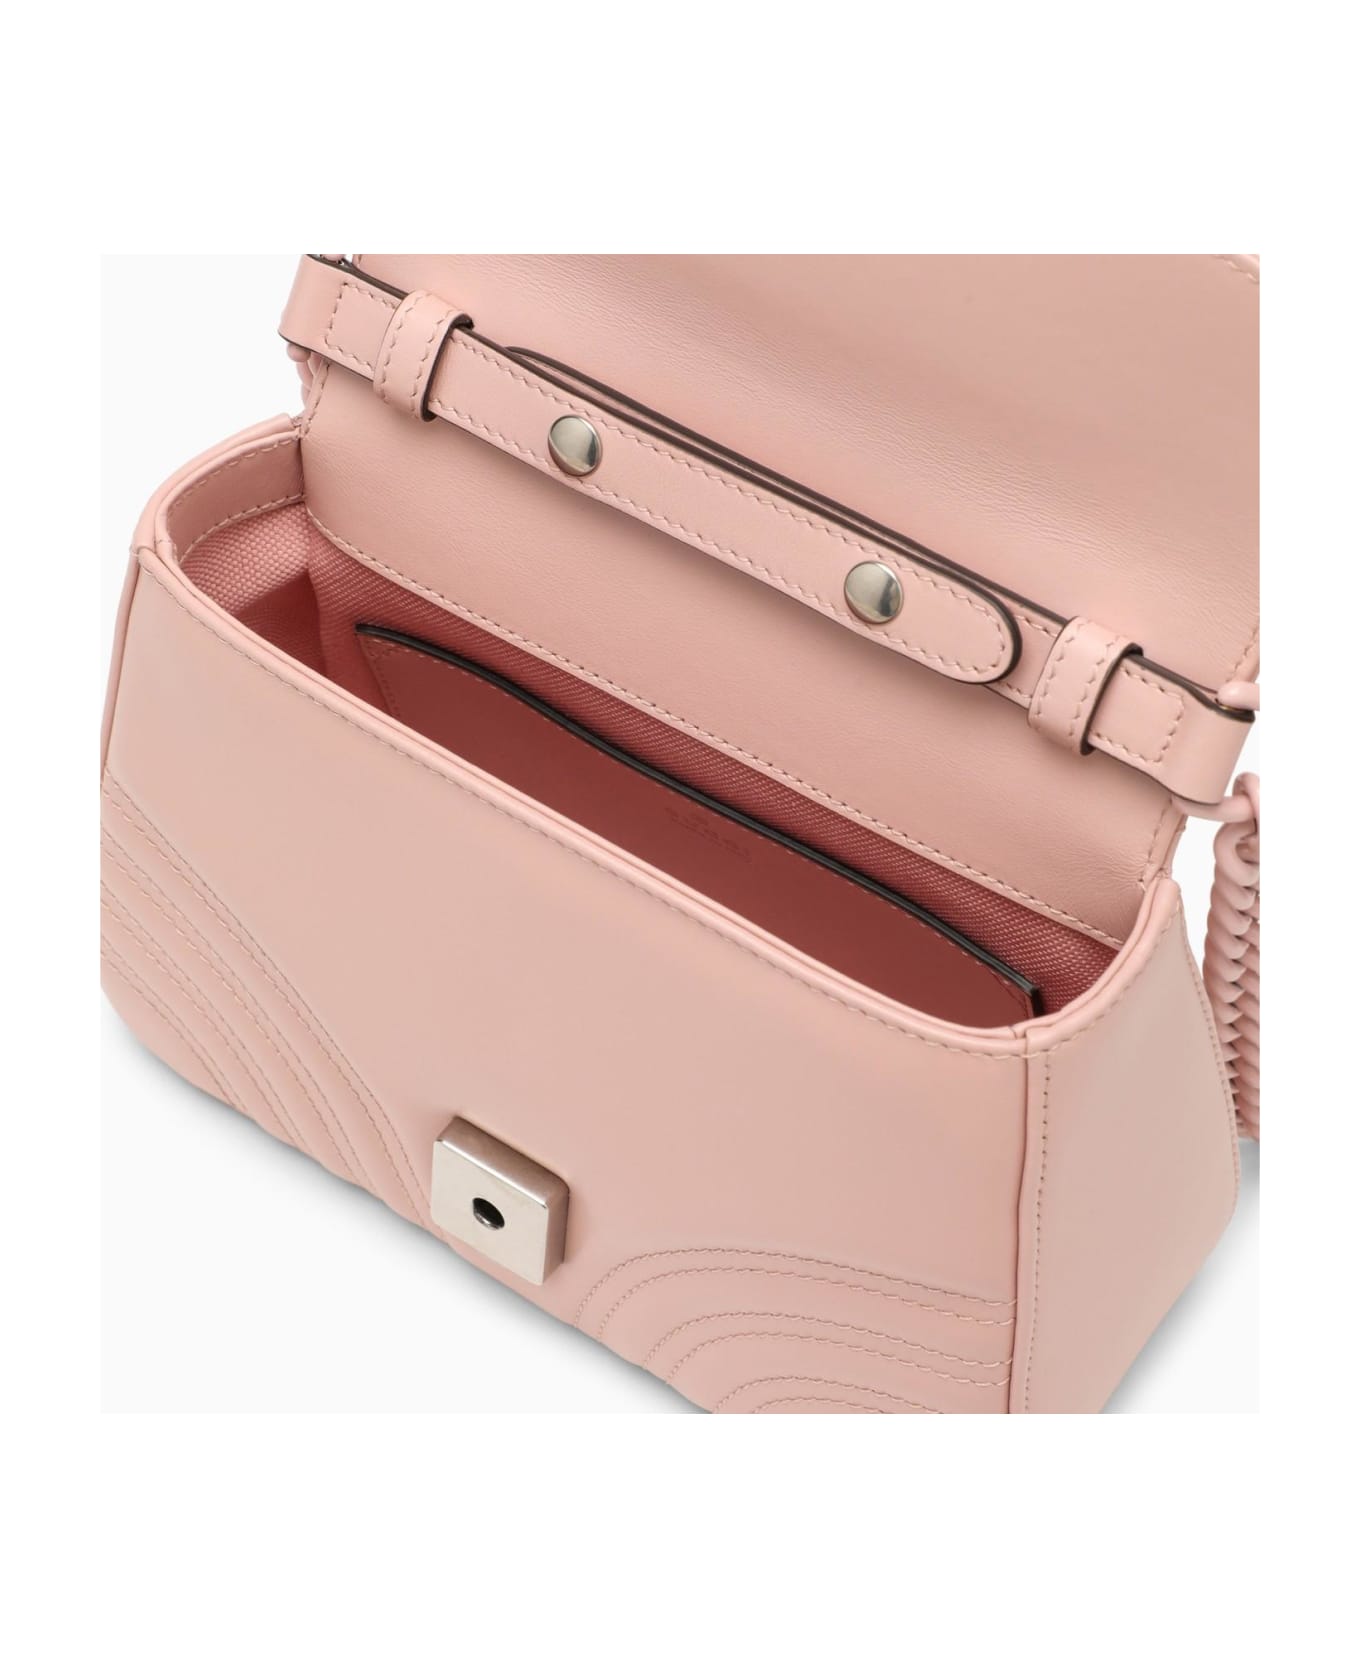 Gucci Gg Marmont Pink Leather Mini Handbag - Perfect Pink トートバッグ